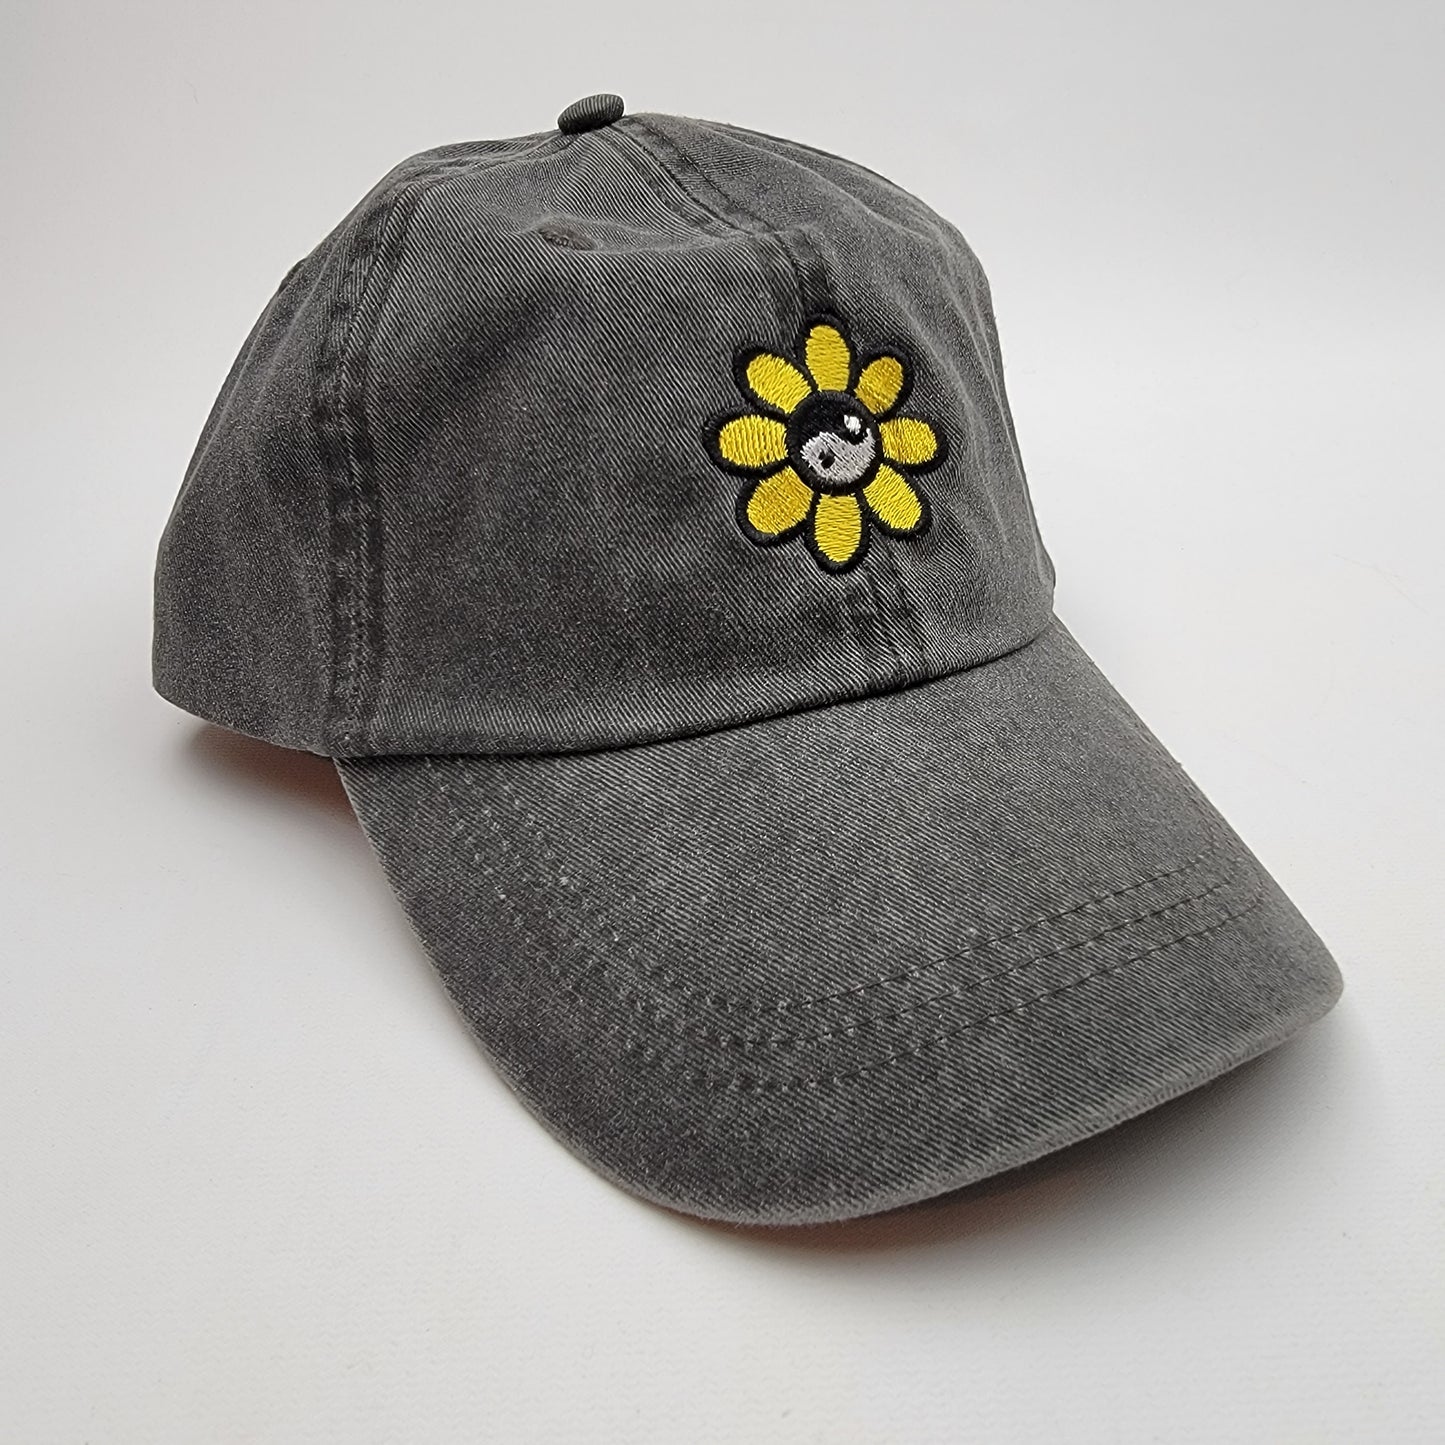 Yin & Yang Sunflower Relaxed Cotton Women's Embroidered Buckle Strap Curved Bill Hat Cap Garment Washed Dark Gray